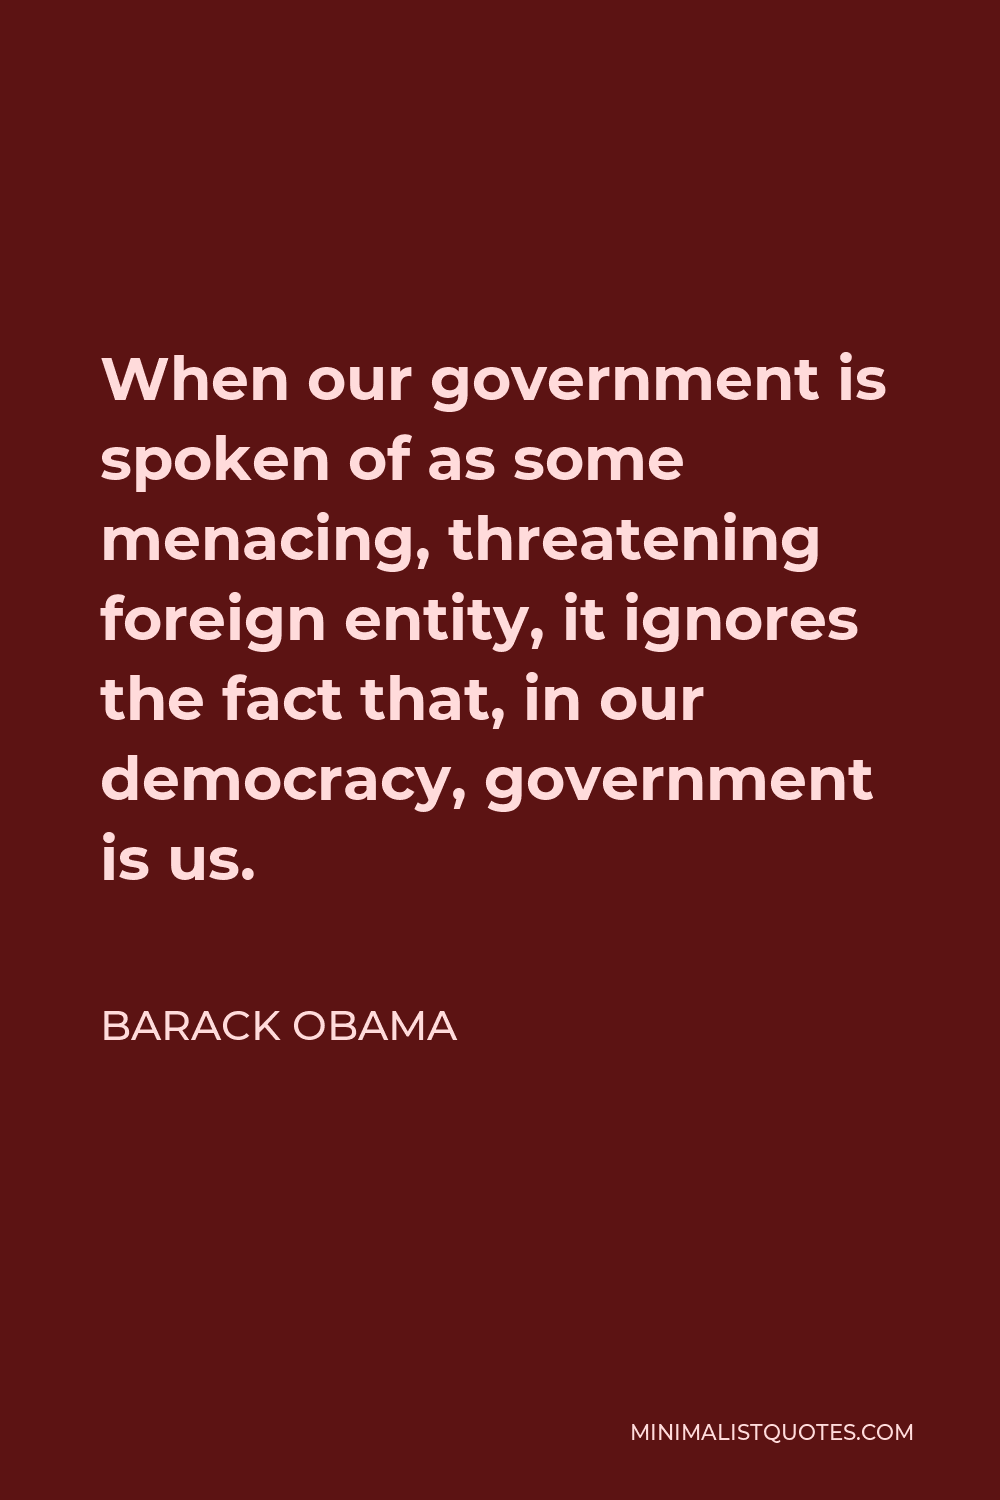 Barack Obama Quote - When our government is spoken of as some menacing, threatening foreign entity, it ignores the fact that, in our democracy, government is us.